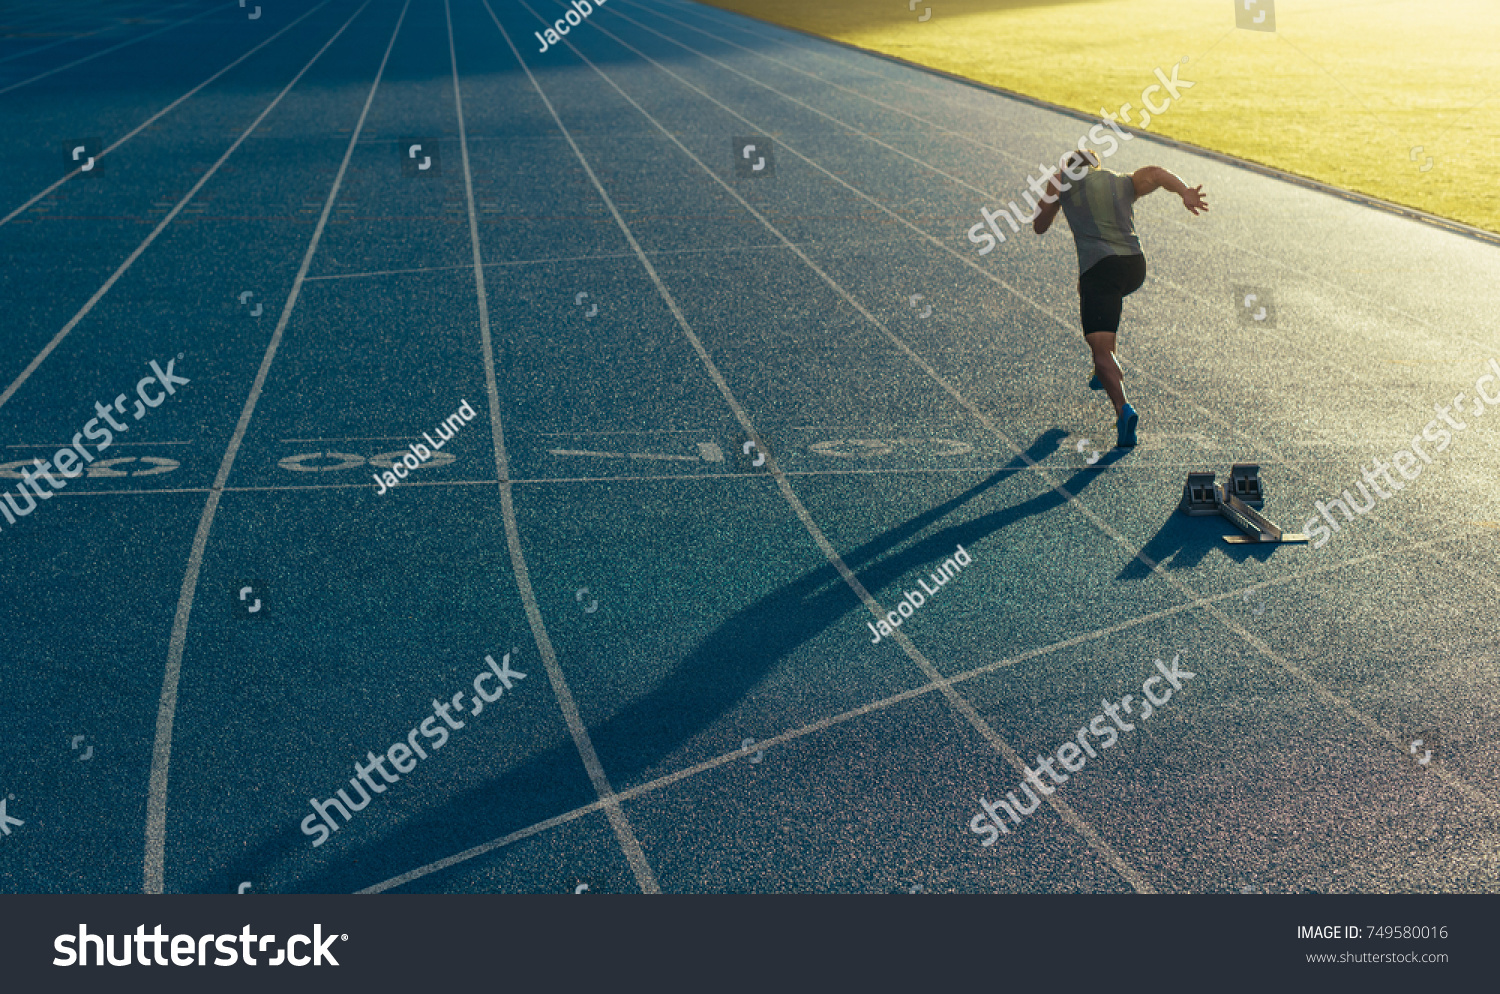 Athlete running on an all-weather running track alone. Runner sprinting on a blue rubberized running track starting off using a starting block. #749580016